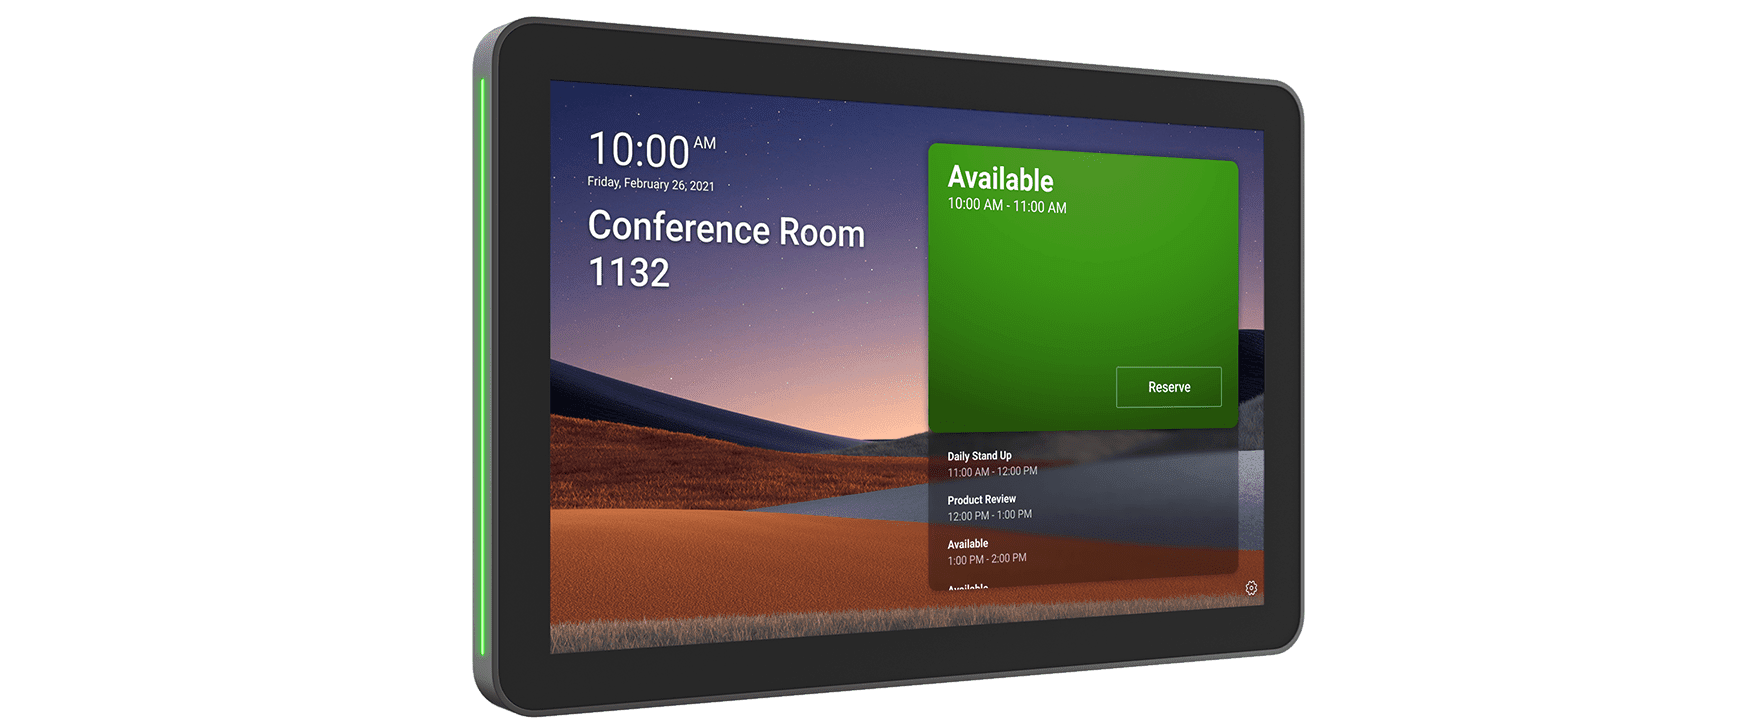 Microsoft meeting room touch controller, available display.